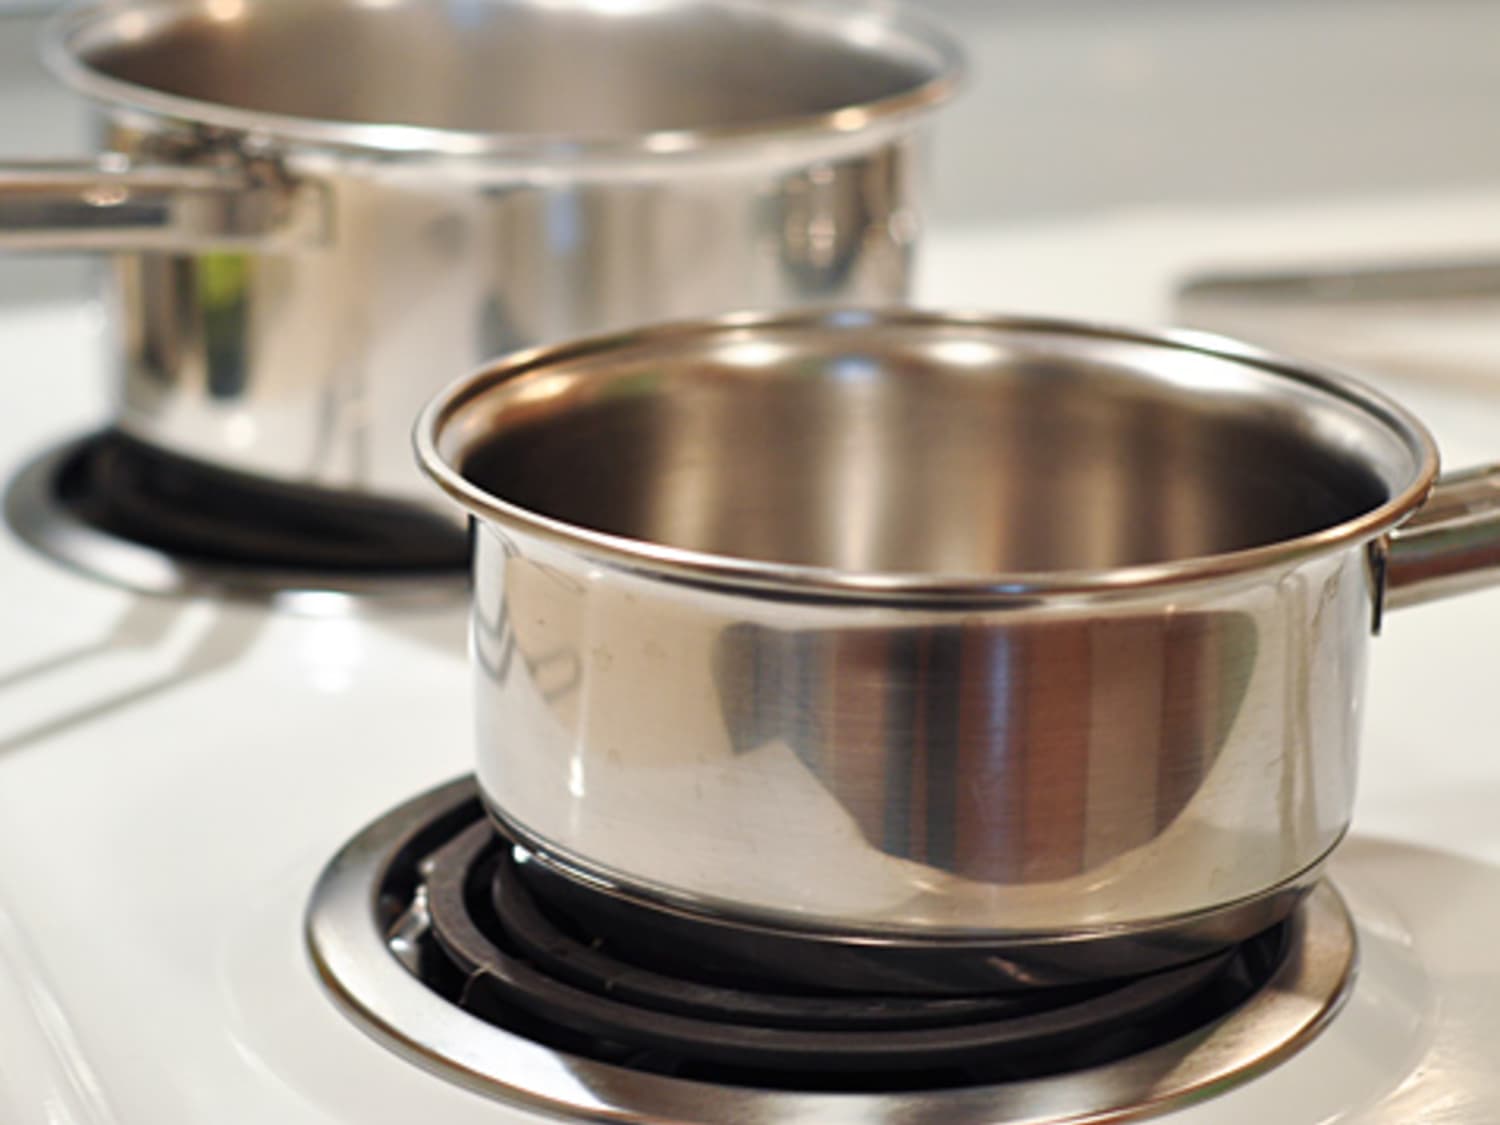 This Is How to Cook Well With an Electric Stove